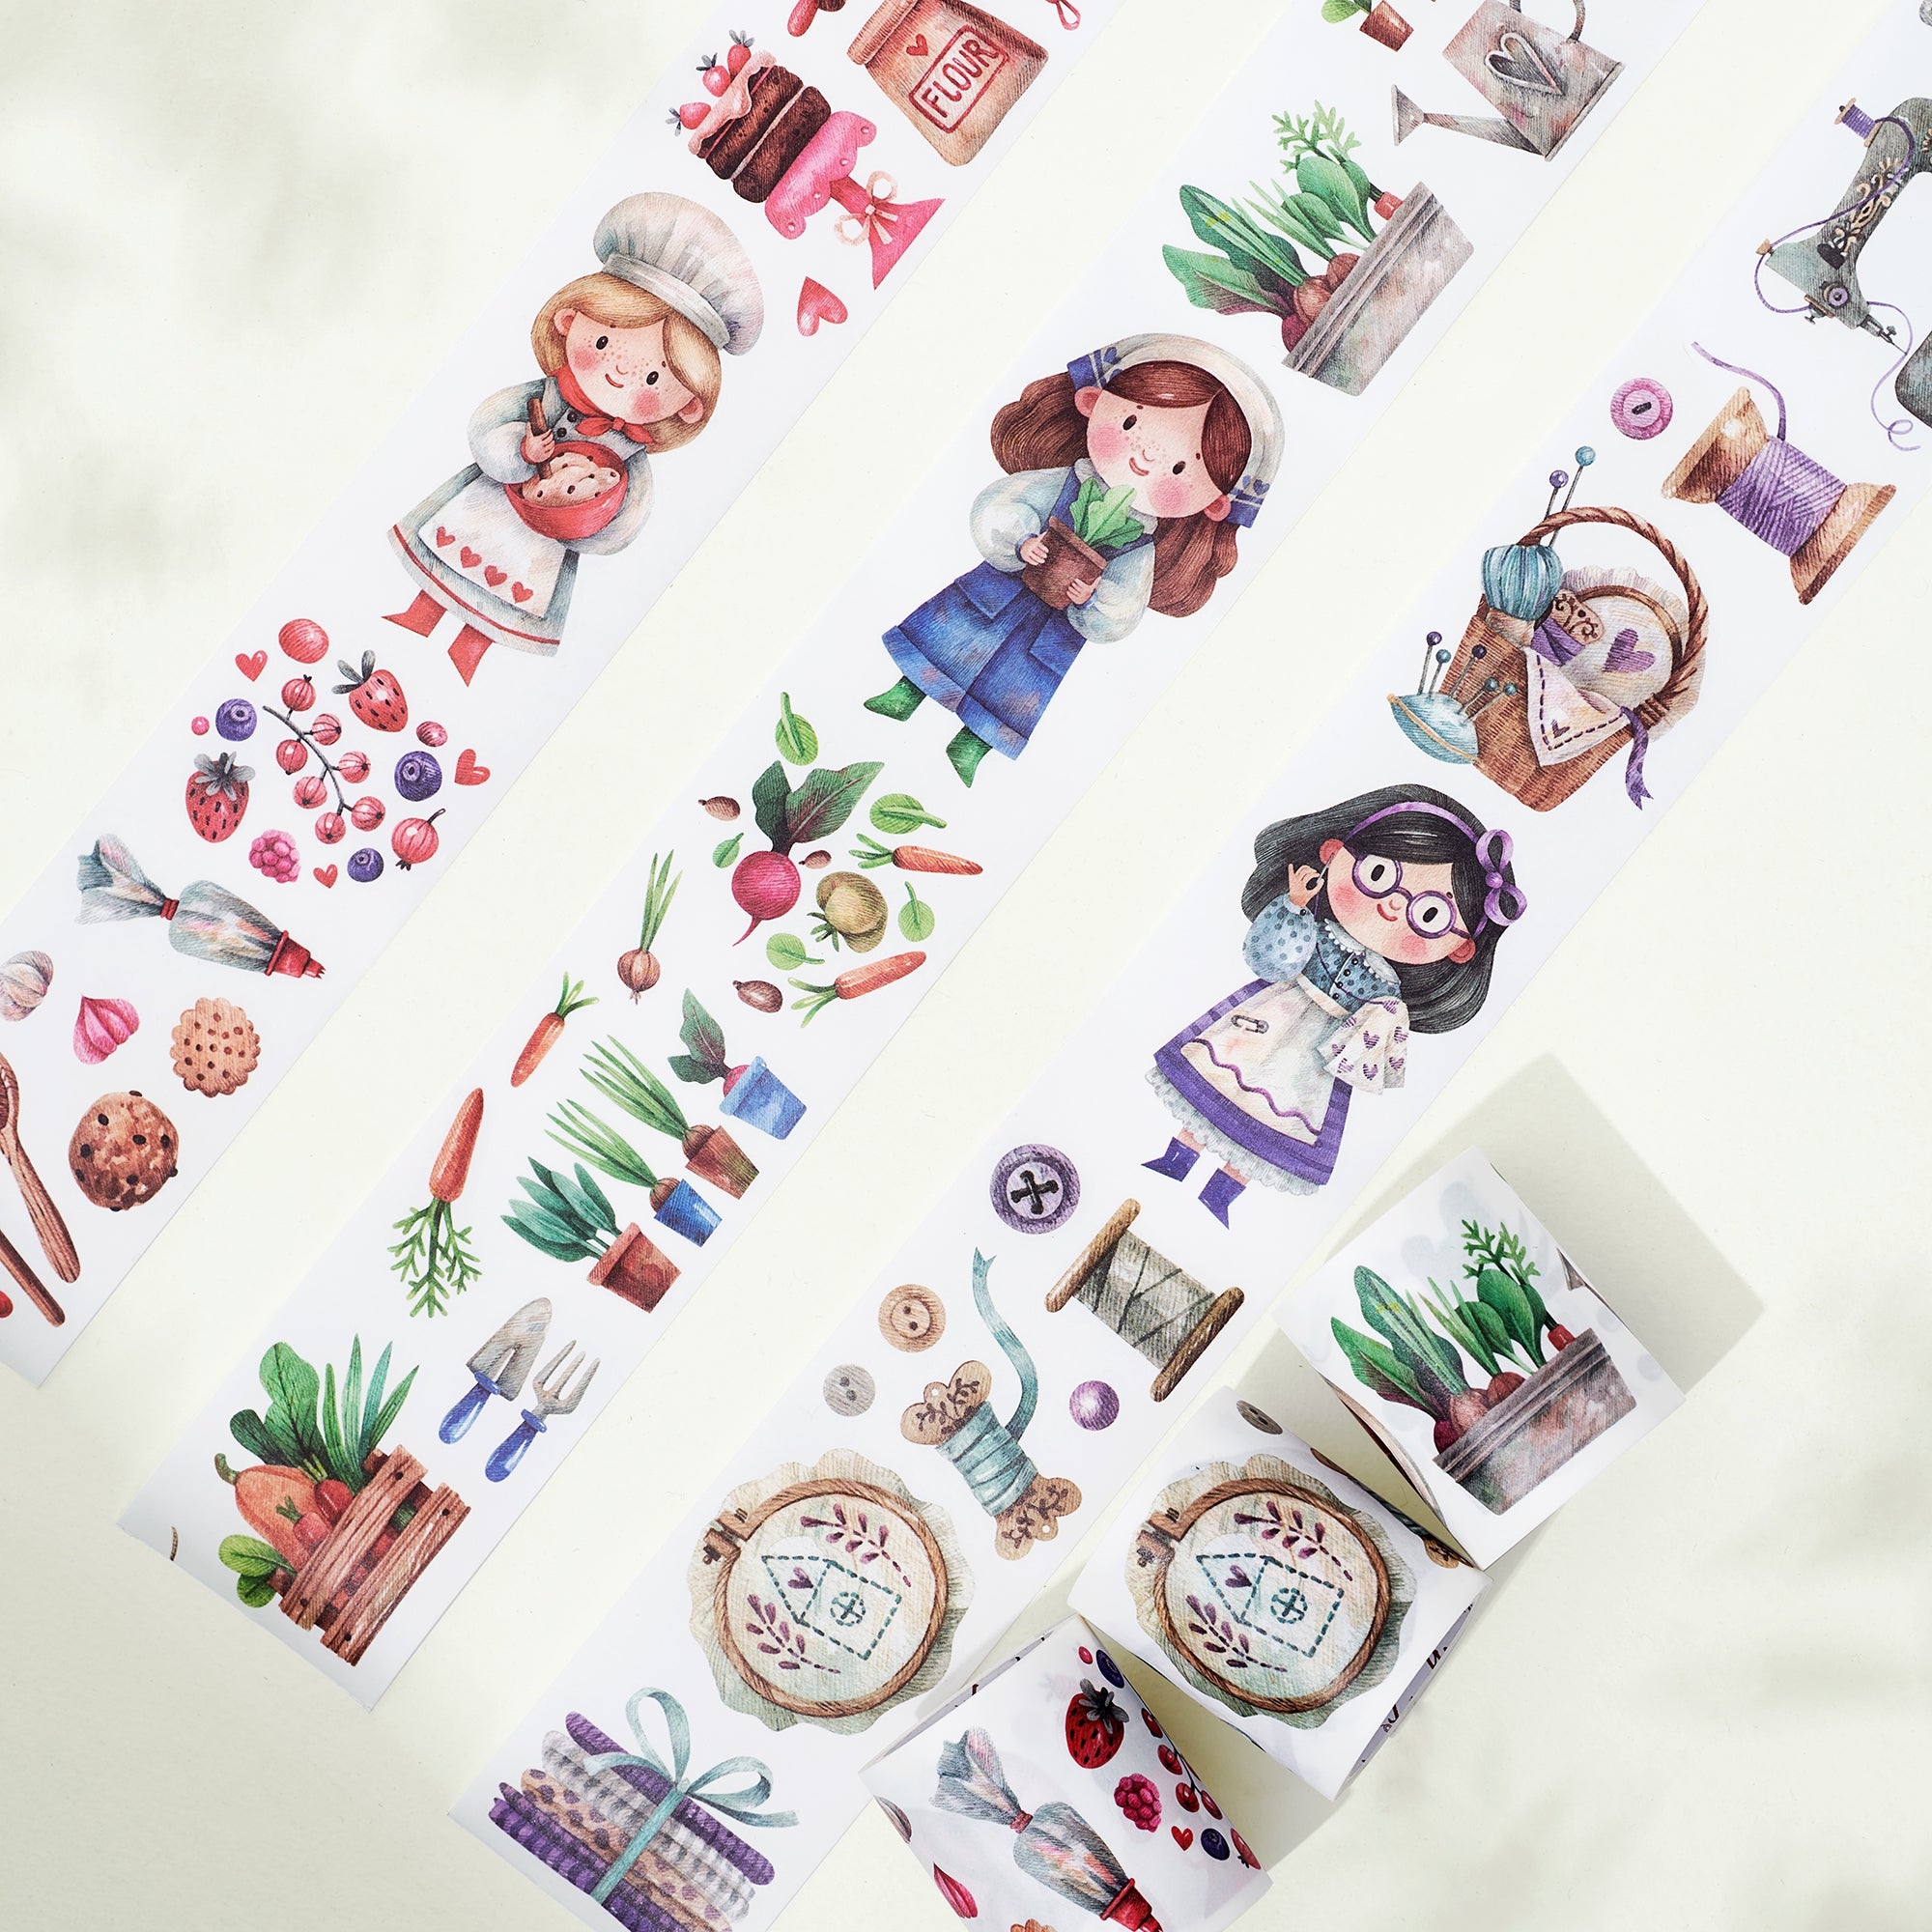 Baking. Gardening. Embroidery. Washi Tape Sticker Set | The Washi Tape Shop. Beautiful Washi and Decorative Tape For Bullet Journals, Gift Wrapping, Planner Decoration and DIY Projects